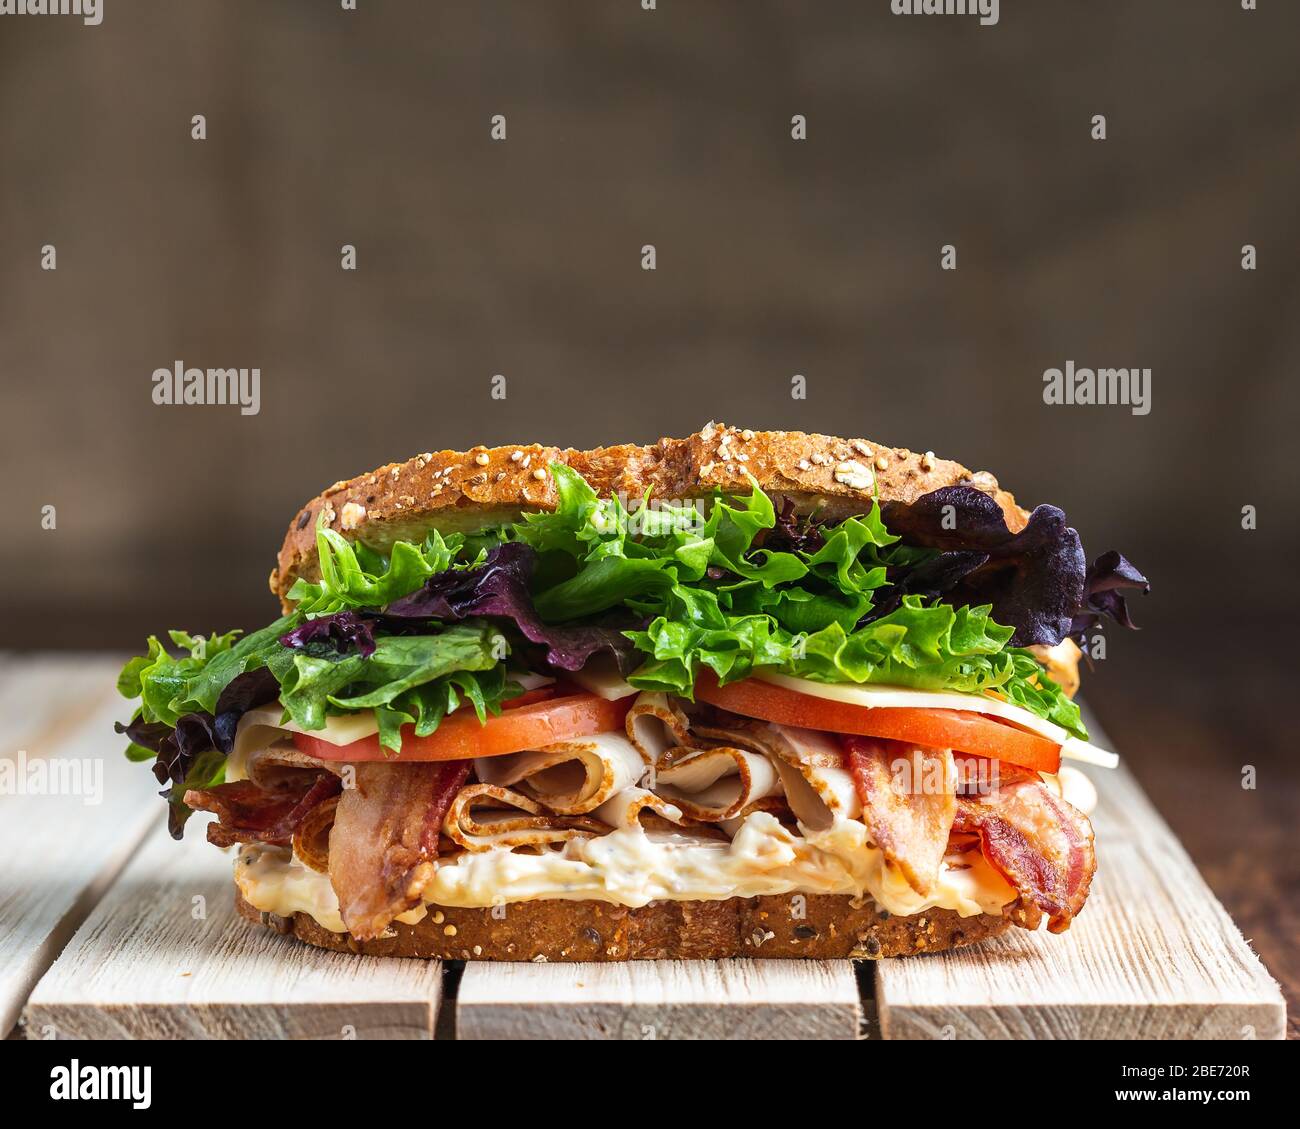 BLT sandwich on wooden surface with linen backdrop Stock Photo